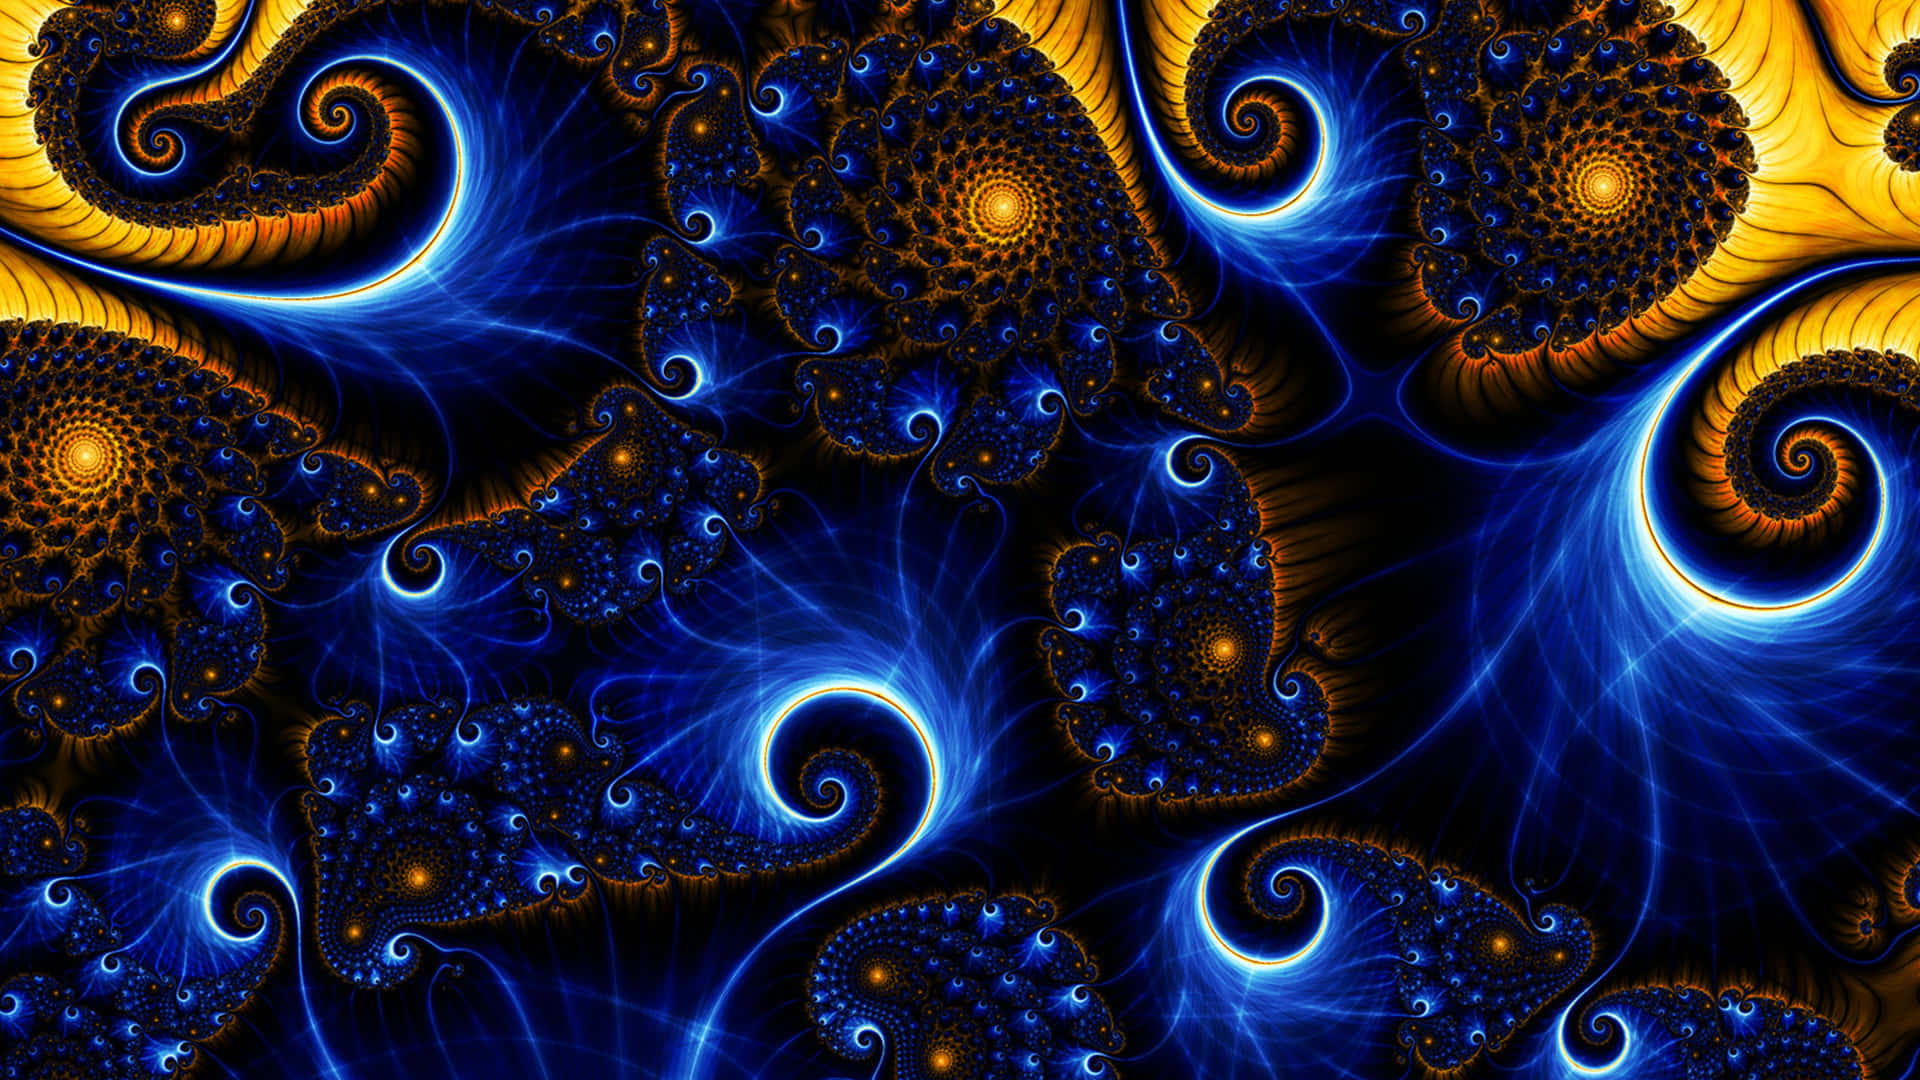 Enchanting Psychedelic Fractals in Colorful Display Wallpaper